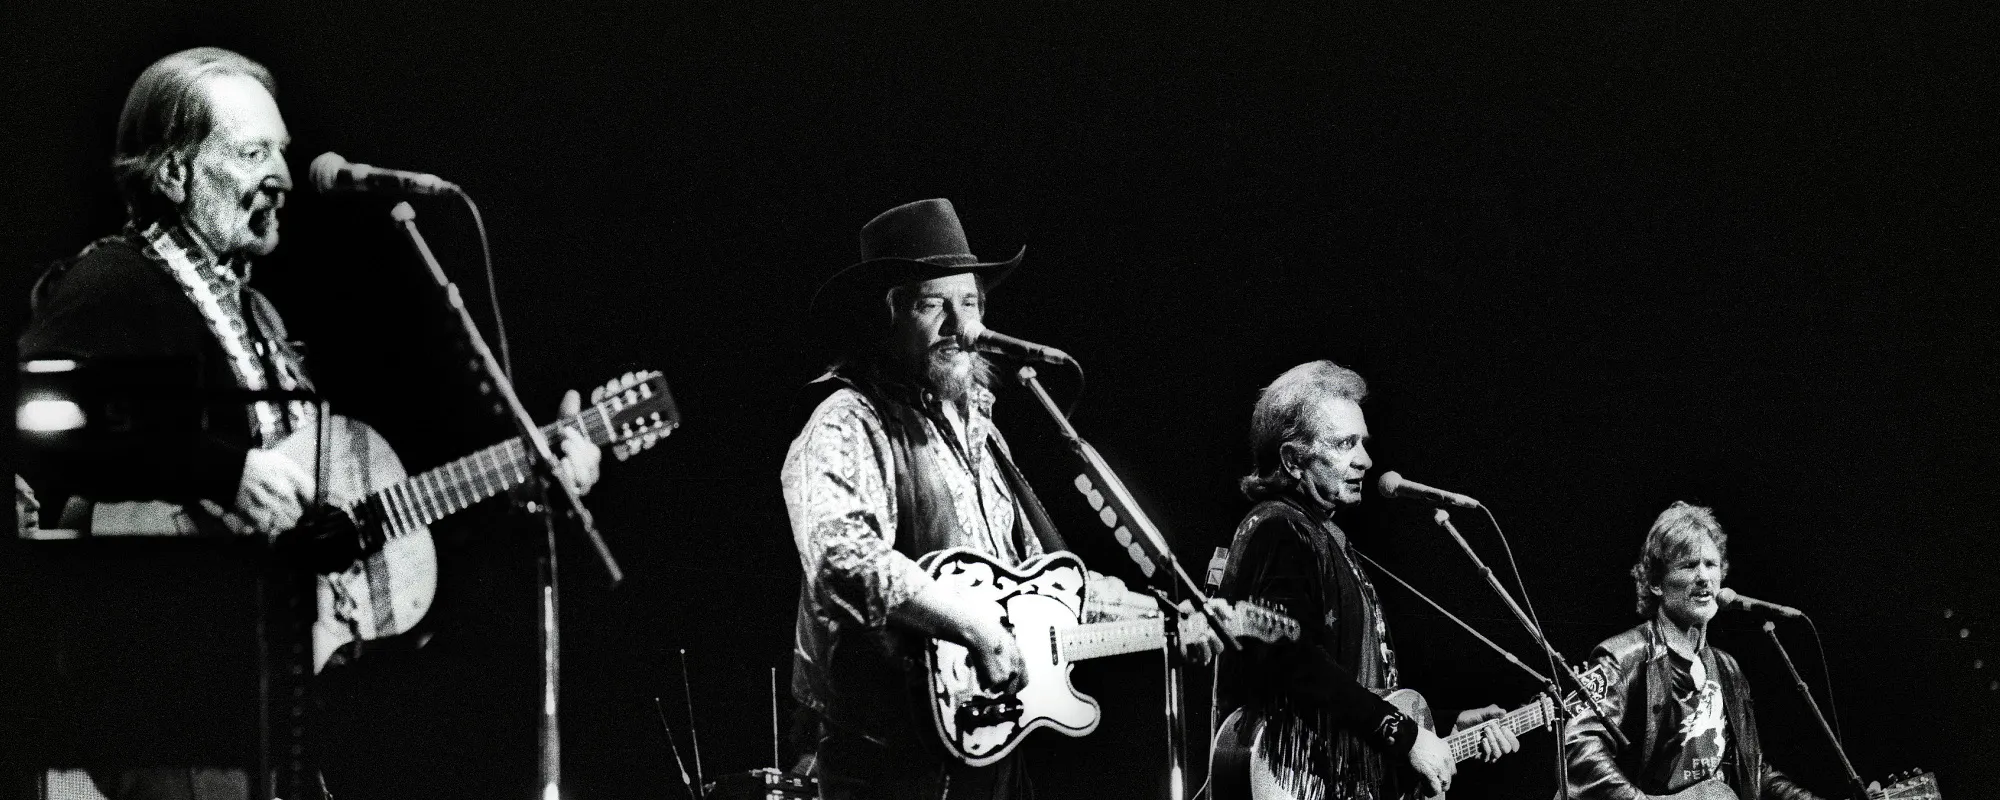 5 Most “On’ry” Rebels of Outlaw Country